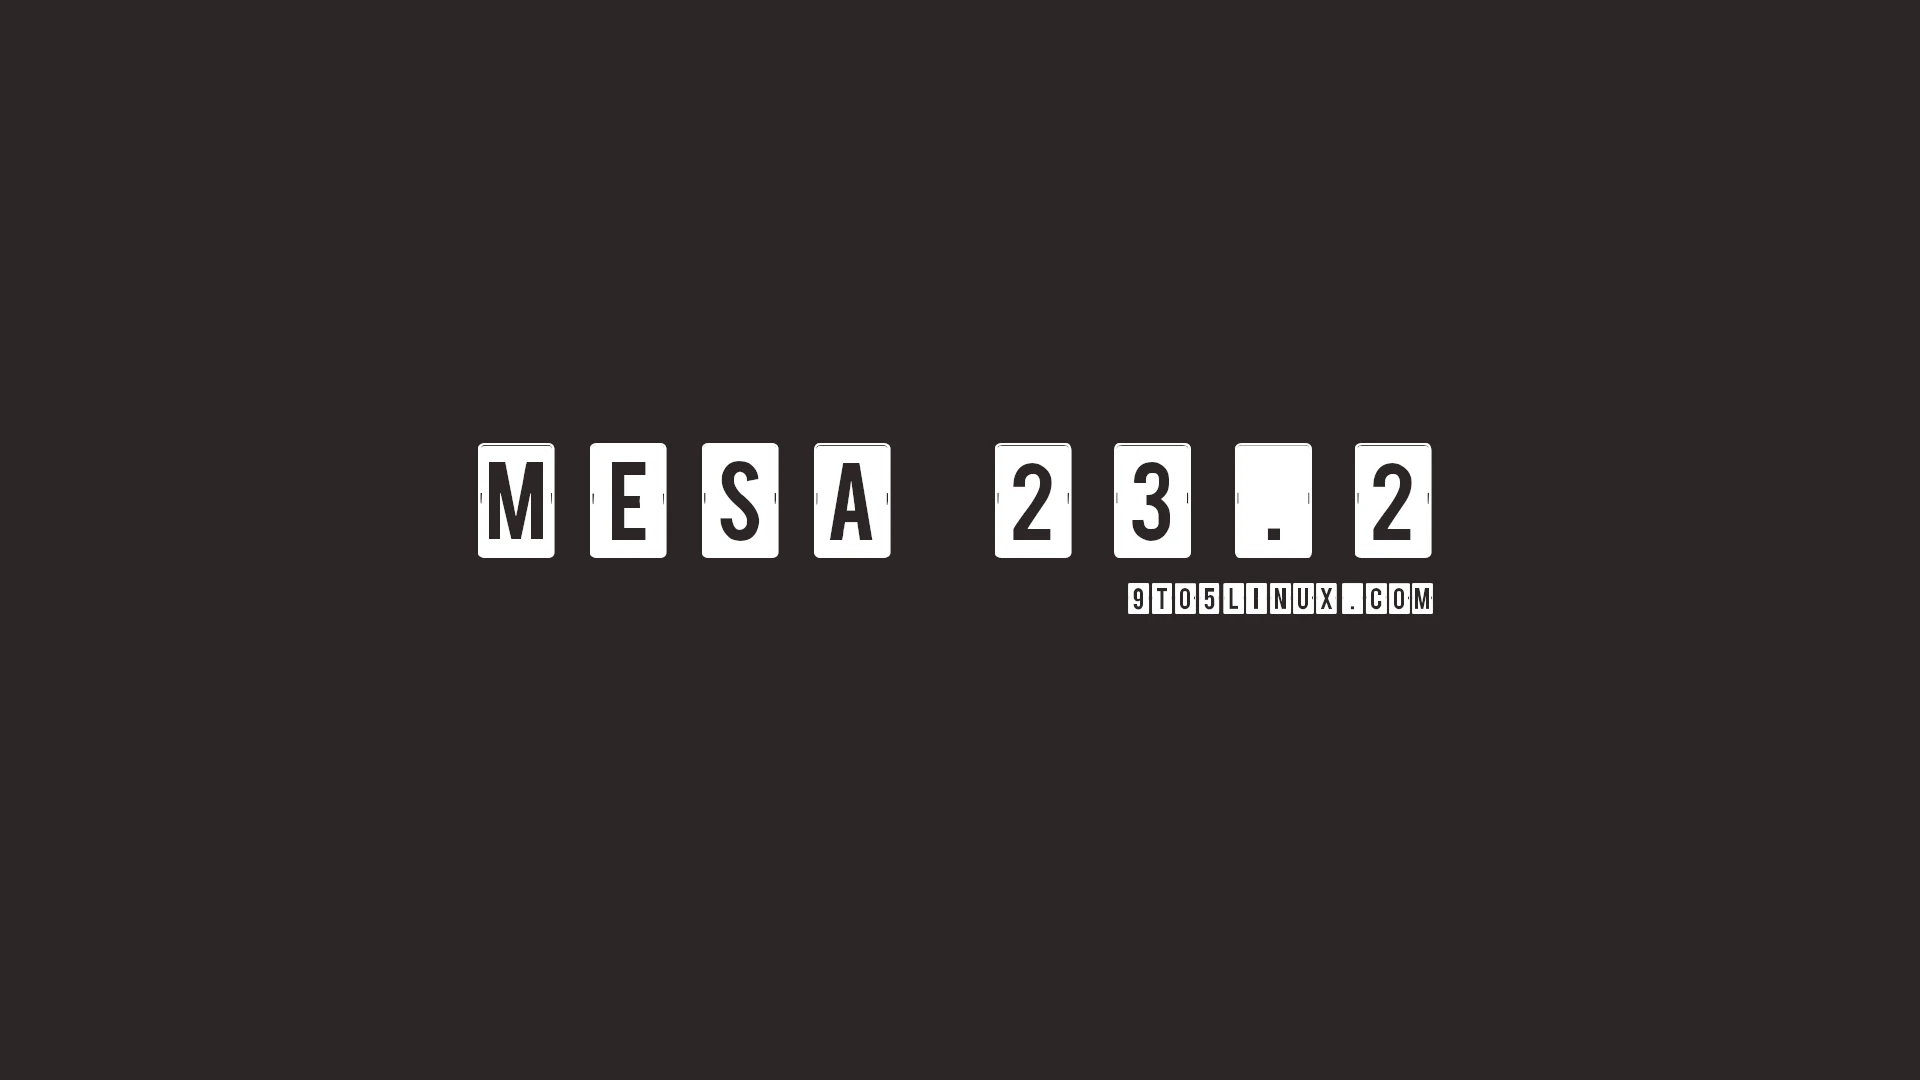 Mesa 23.2 Brings OpenGL 3.1 & OpenGL ES 3.0 Support on Asahi, New RADV Features